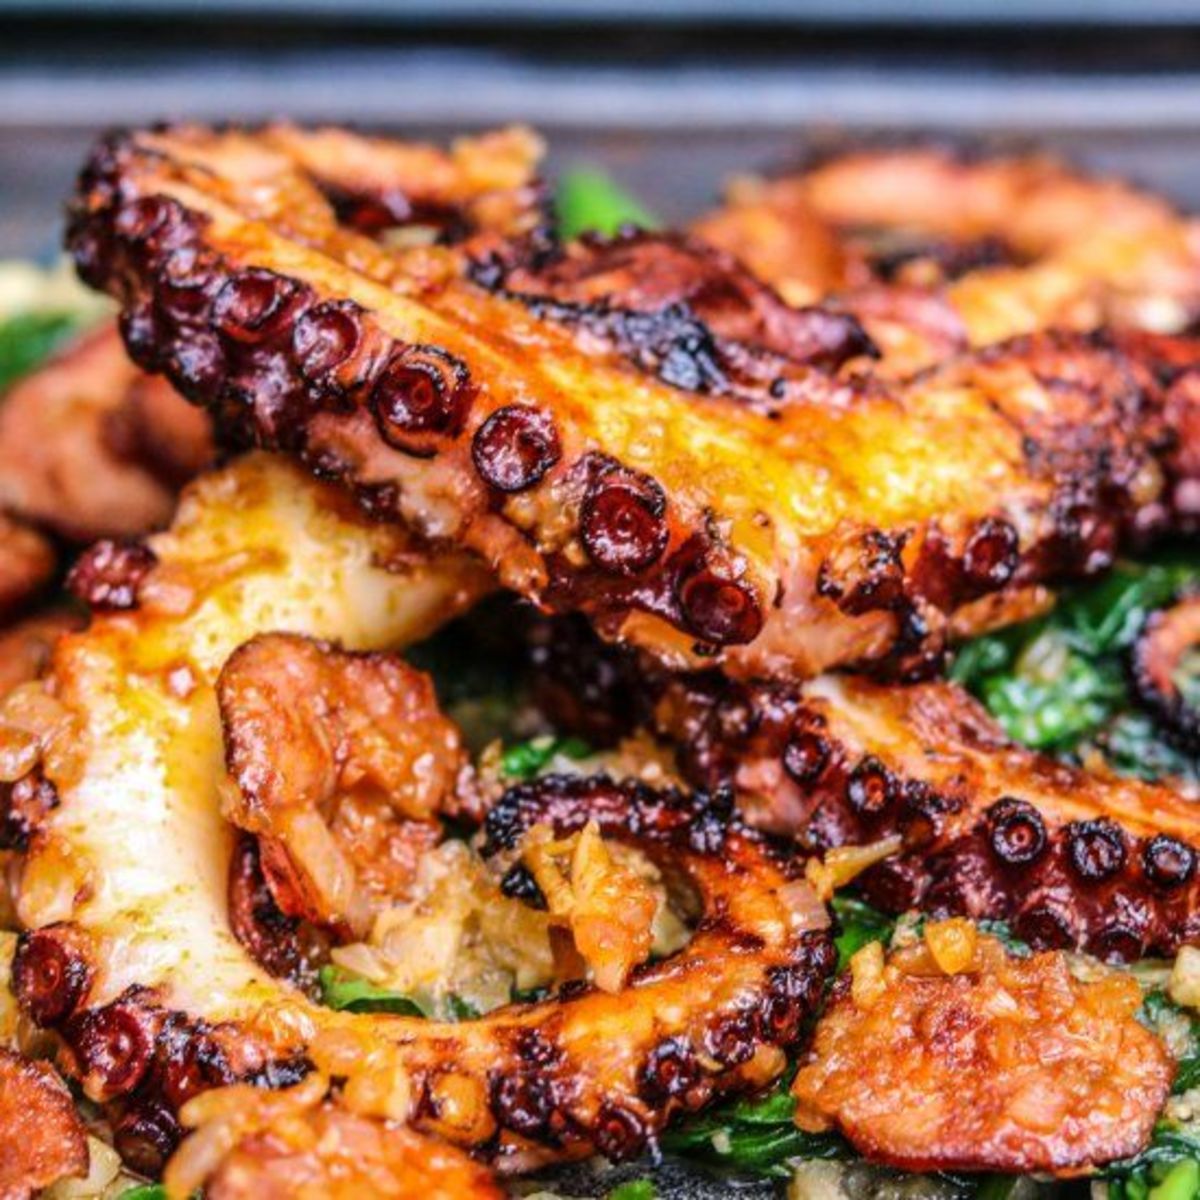 braised-octopus-seafood-recipes-for-dinner